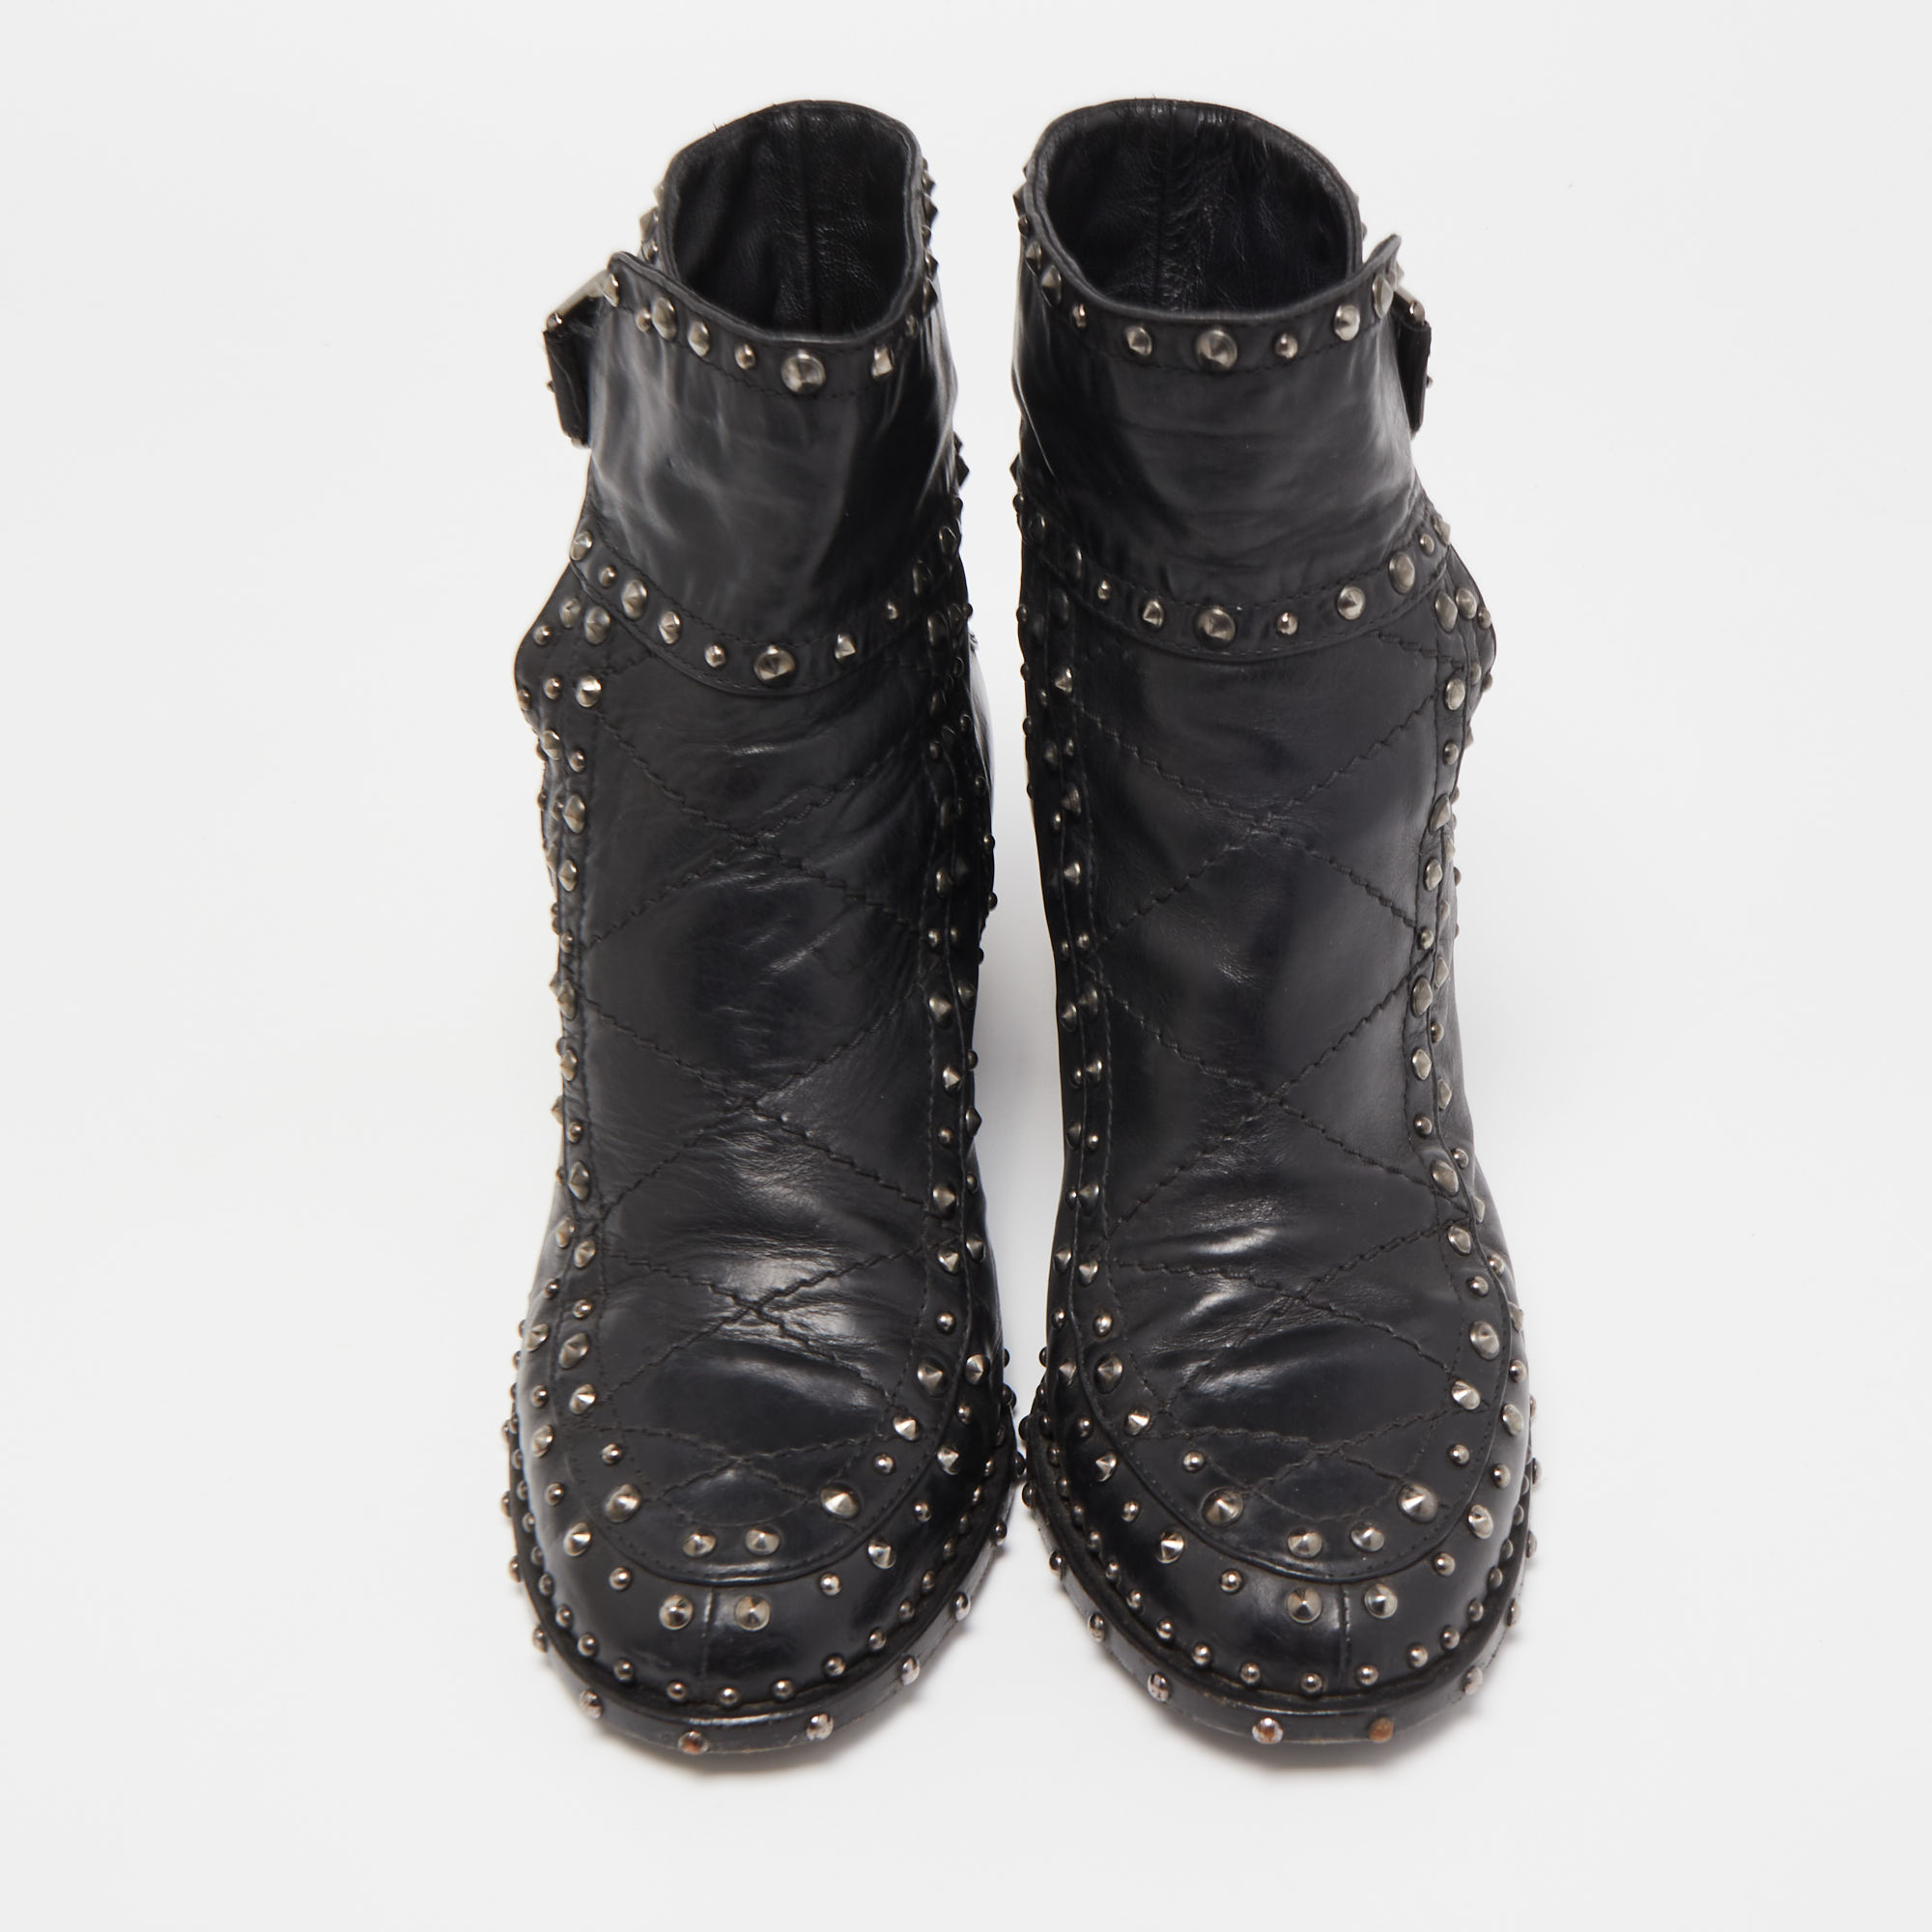 Laurence Dacade Black Leather Studded Ankle Boots Size 37.5